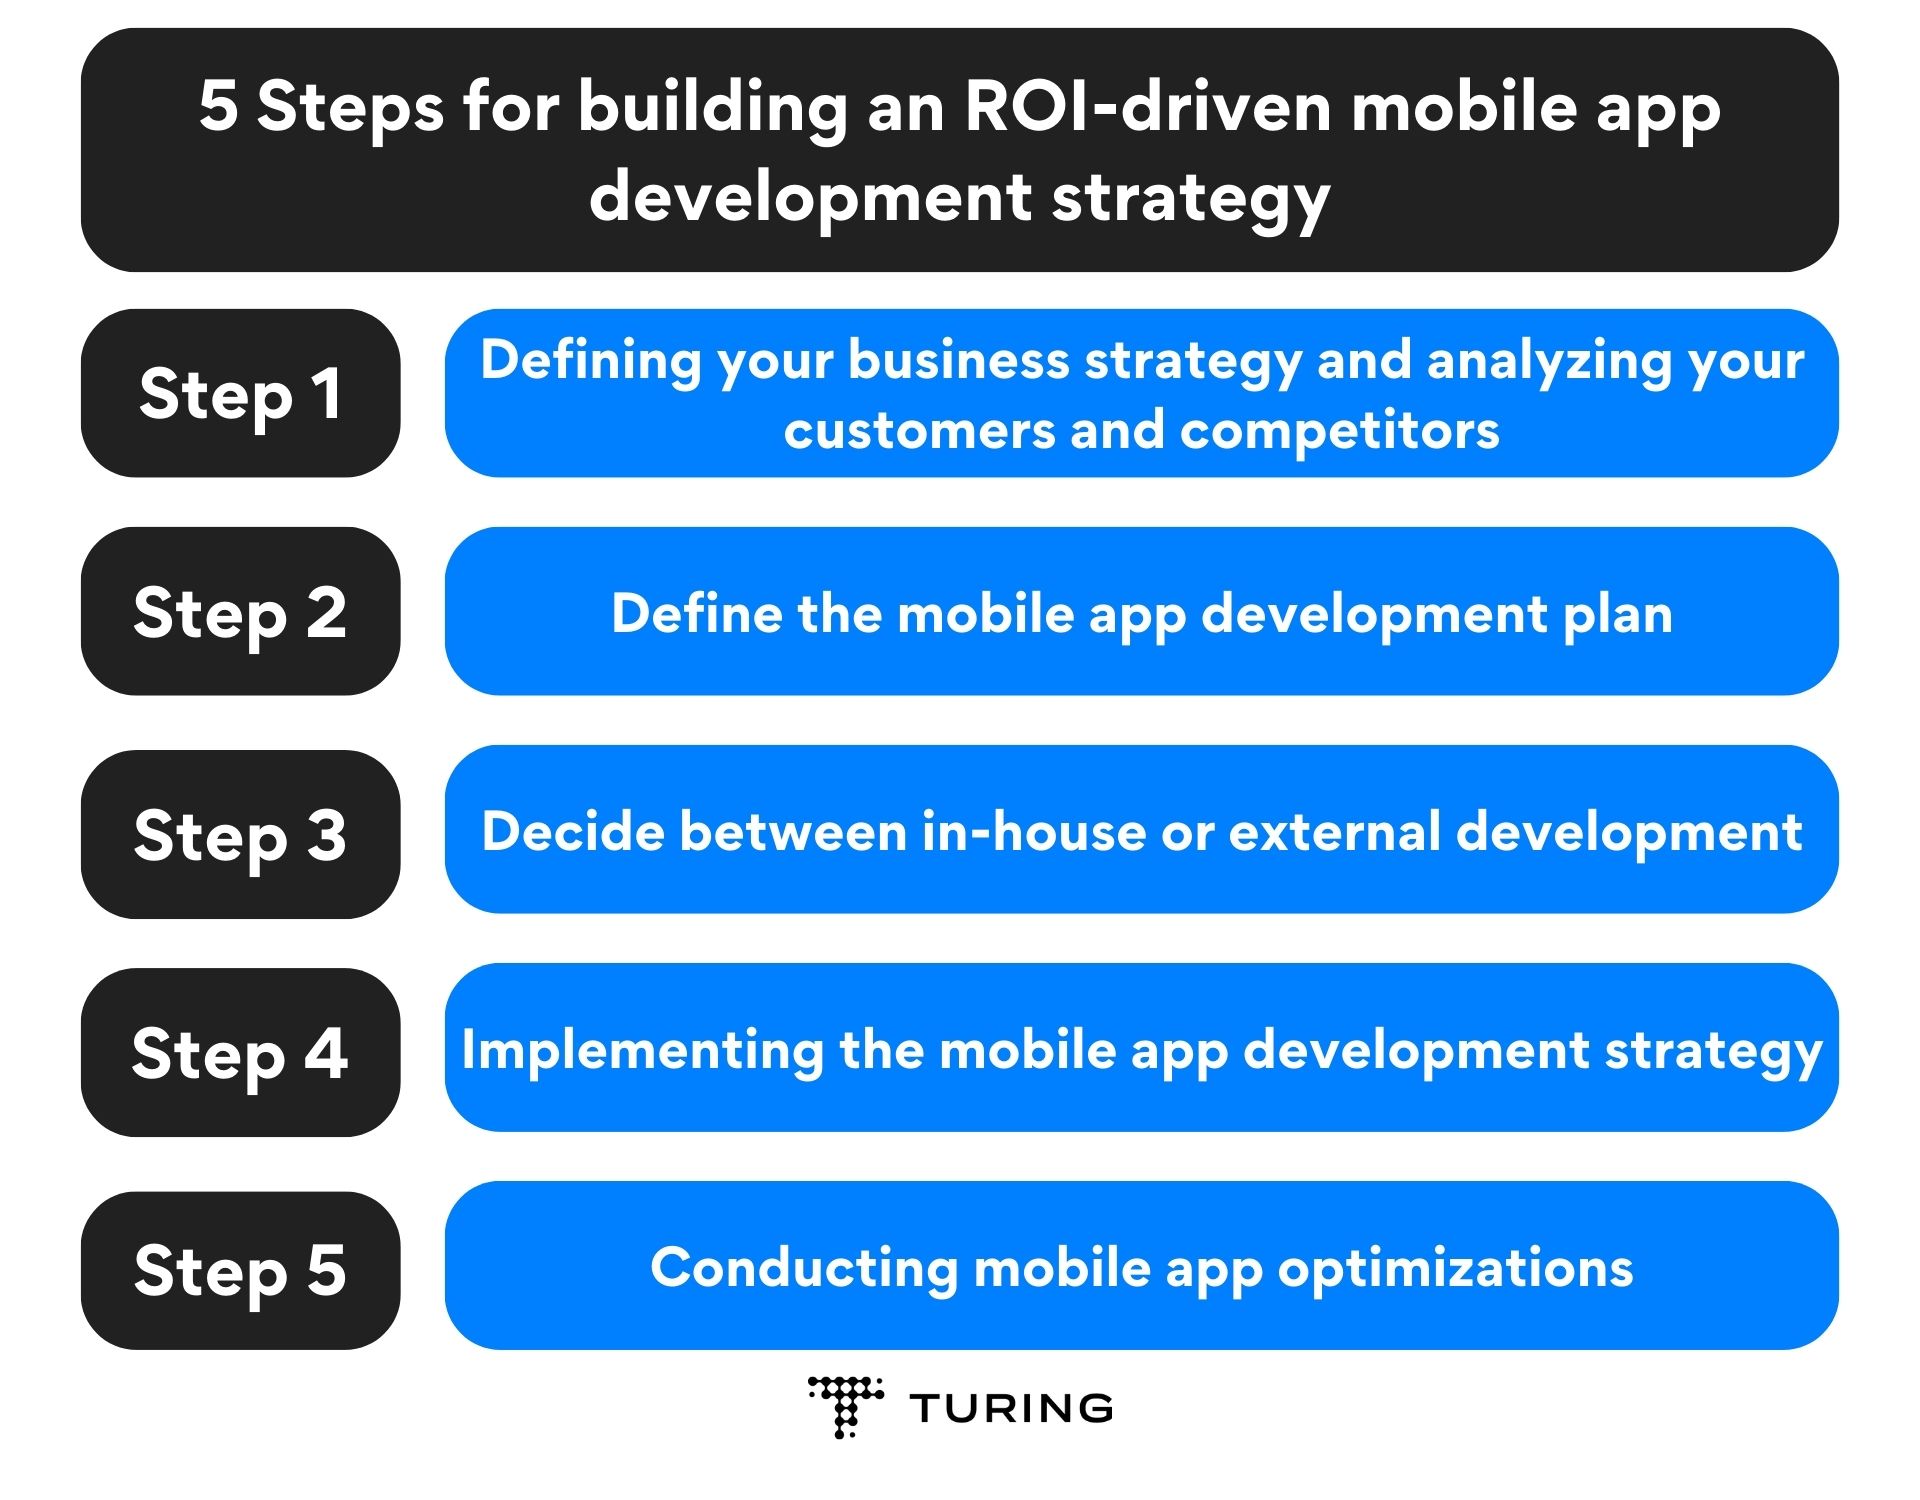 5 Steps for building an ROI-driven mobile app development strategy